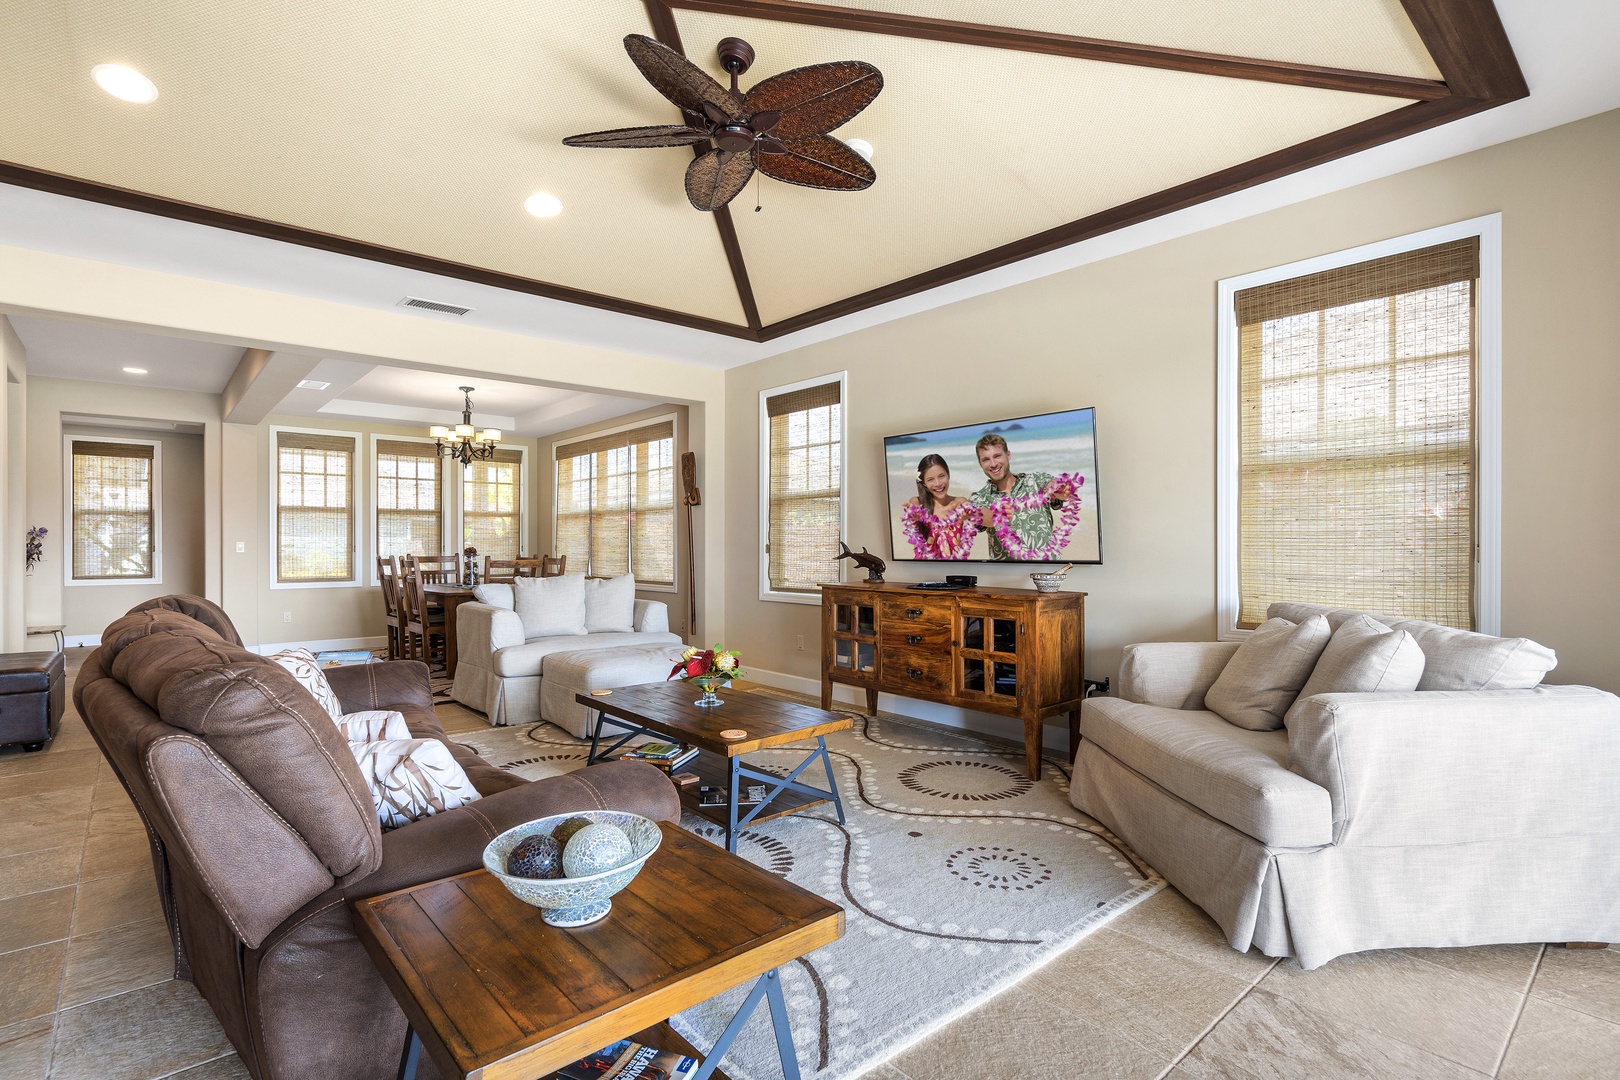 Kailua Kona Vacation Rentals, Kona Blue Vacations Holua Kai - High ceilings, spacious rooms, refined décor, and the perfect balance of cool and warm tones define this elegant single-level home.